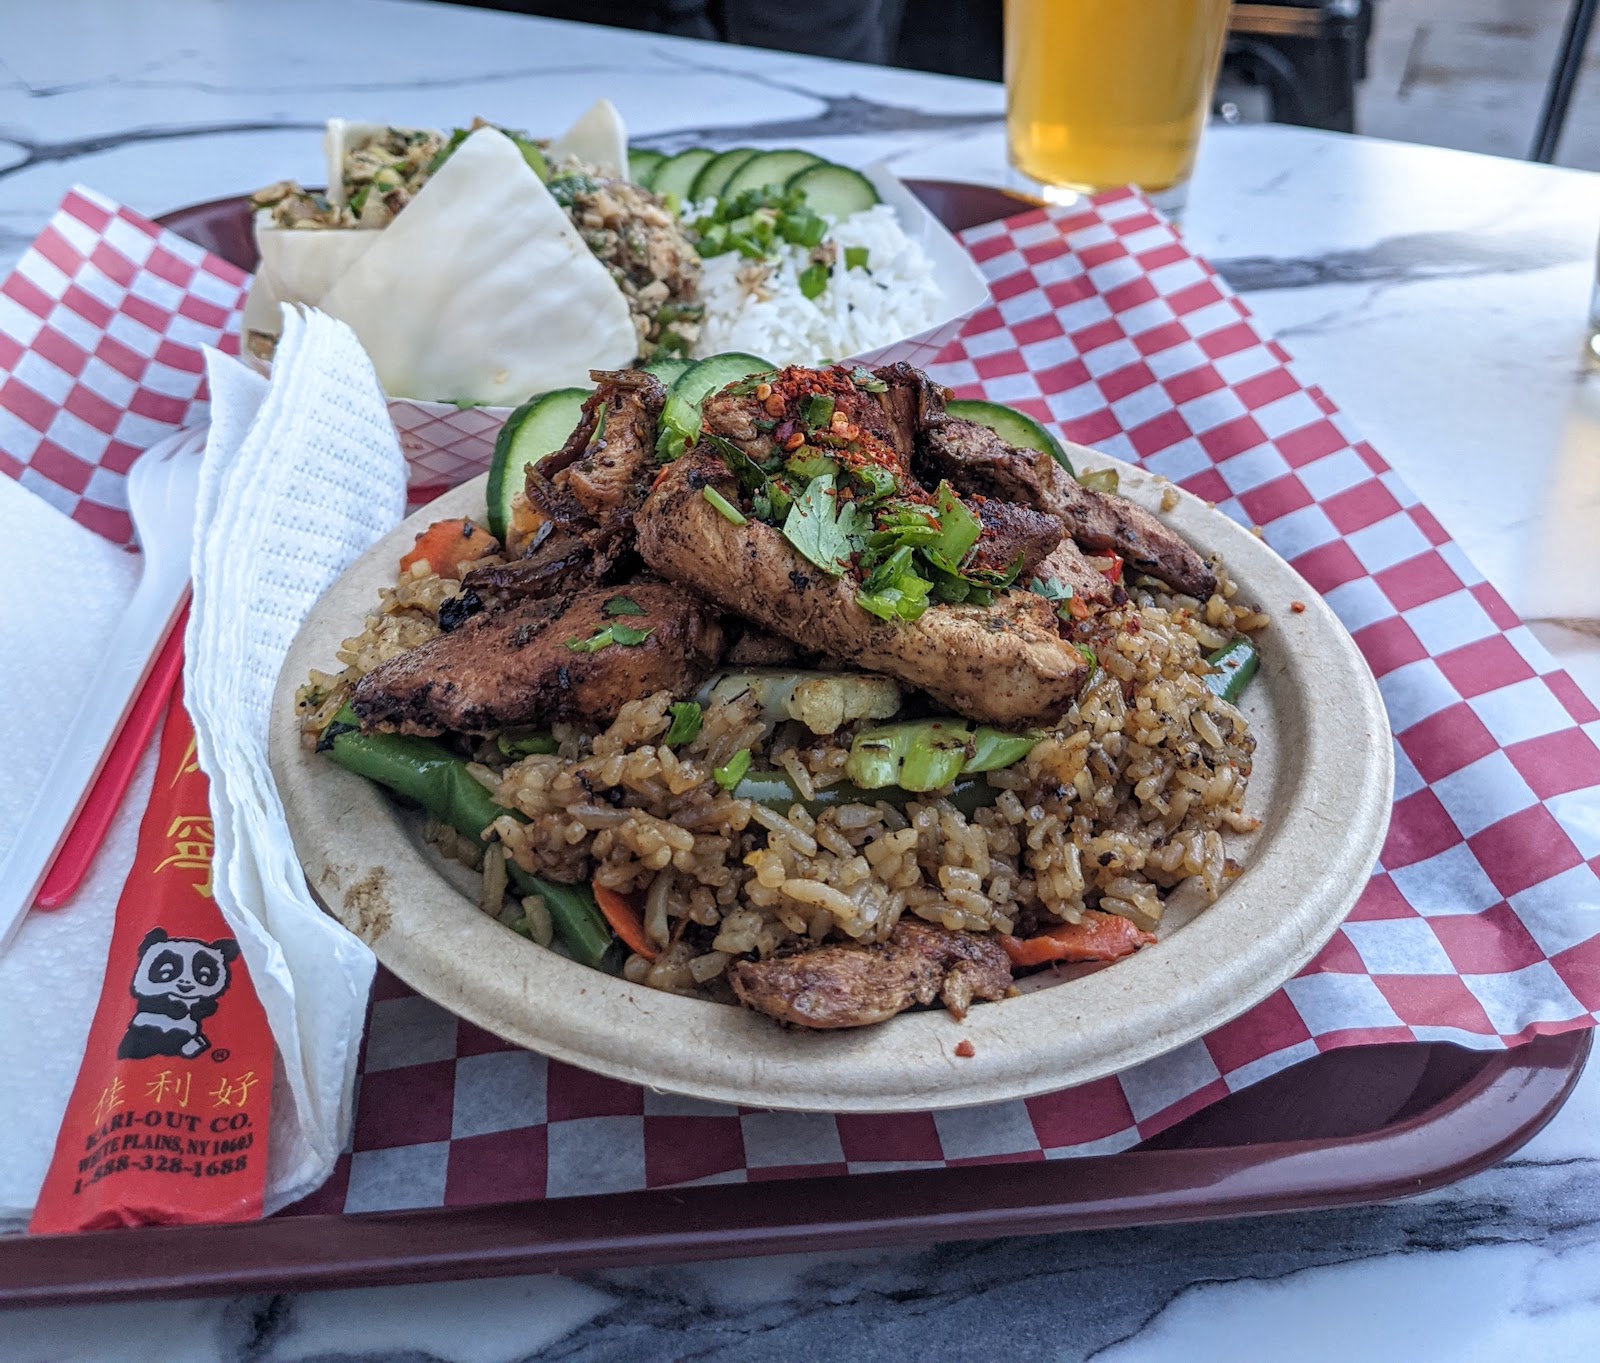 a photo of Thai Fried Rice from Bun Intended is served on a brown paper plate which rests on top of red and white checked paper on top of a brown plastic tray. The tray is on top of a marble table and there are chopsticks and plastic cutlery to the left. A dish of Larb Gai is in the background and so is a glass of beer.